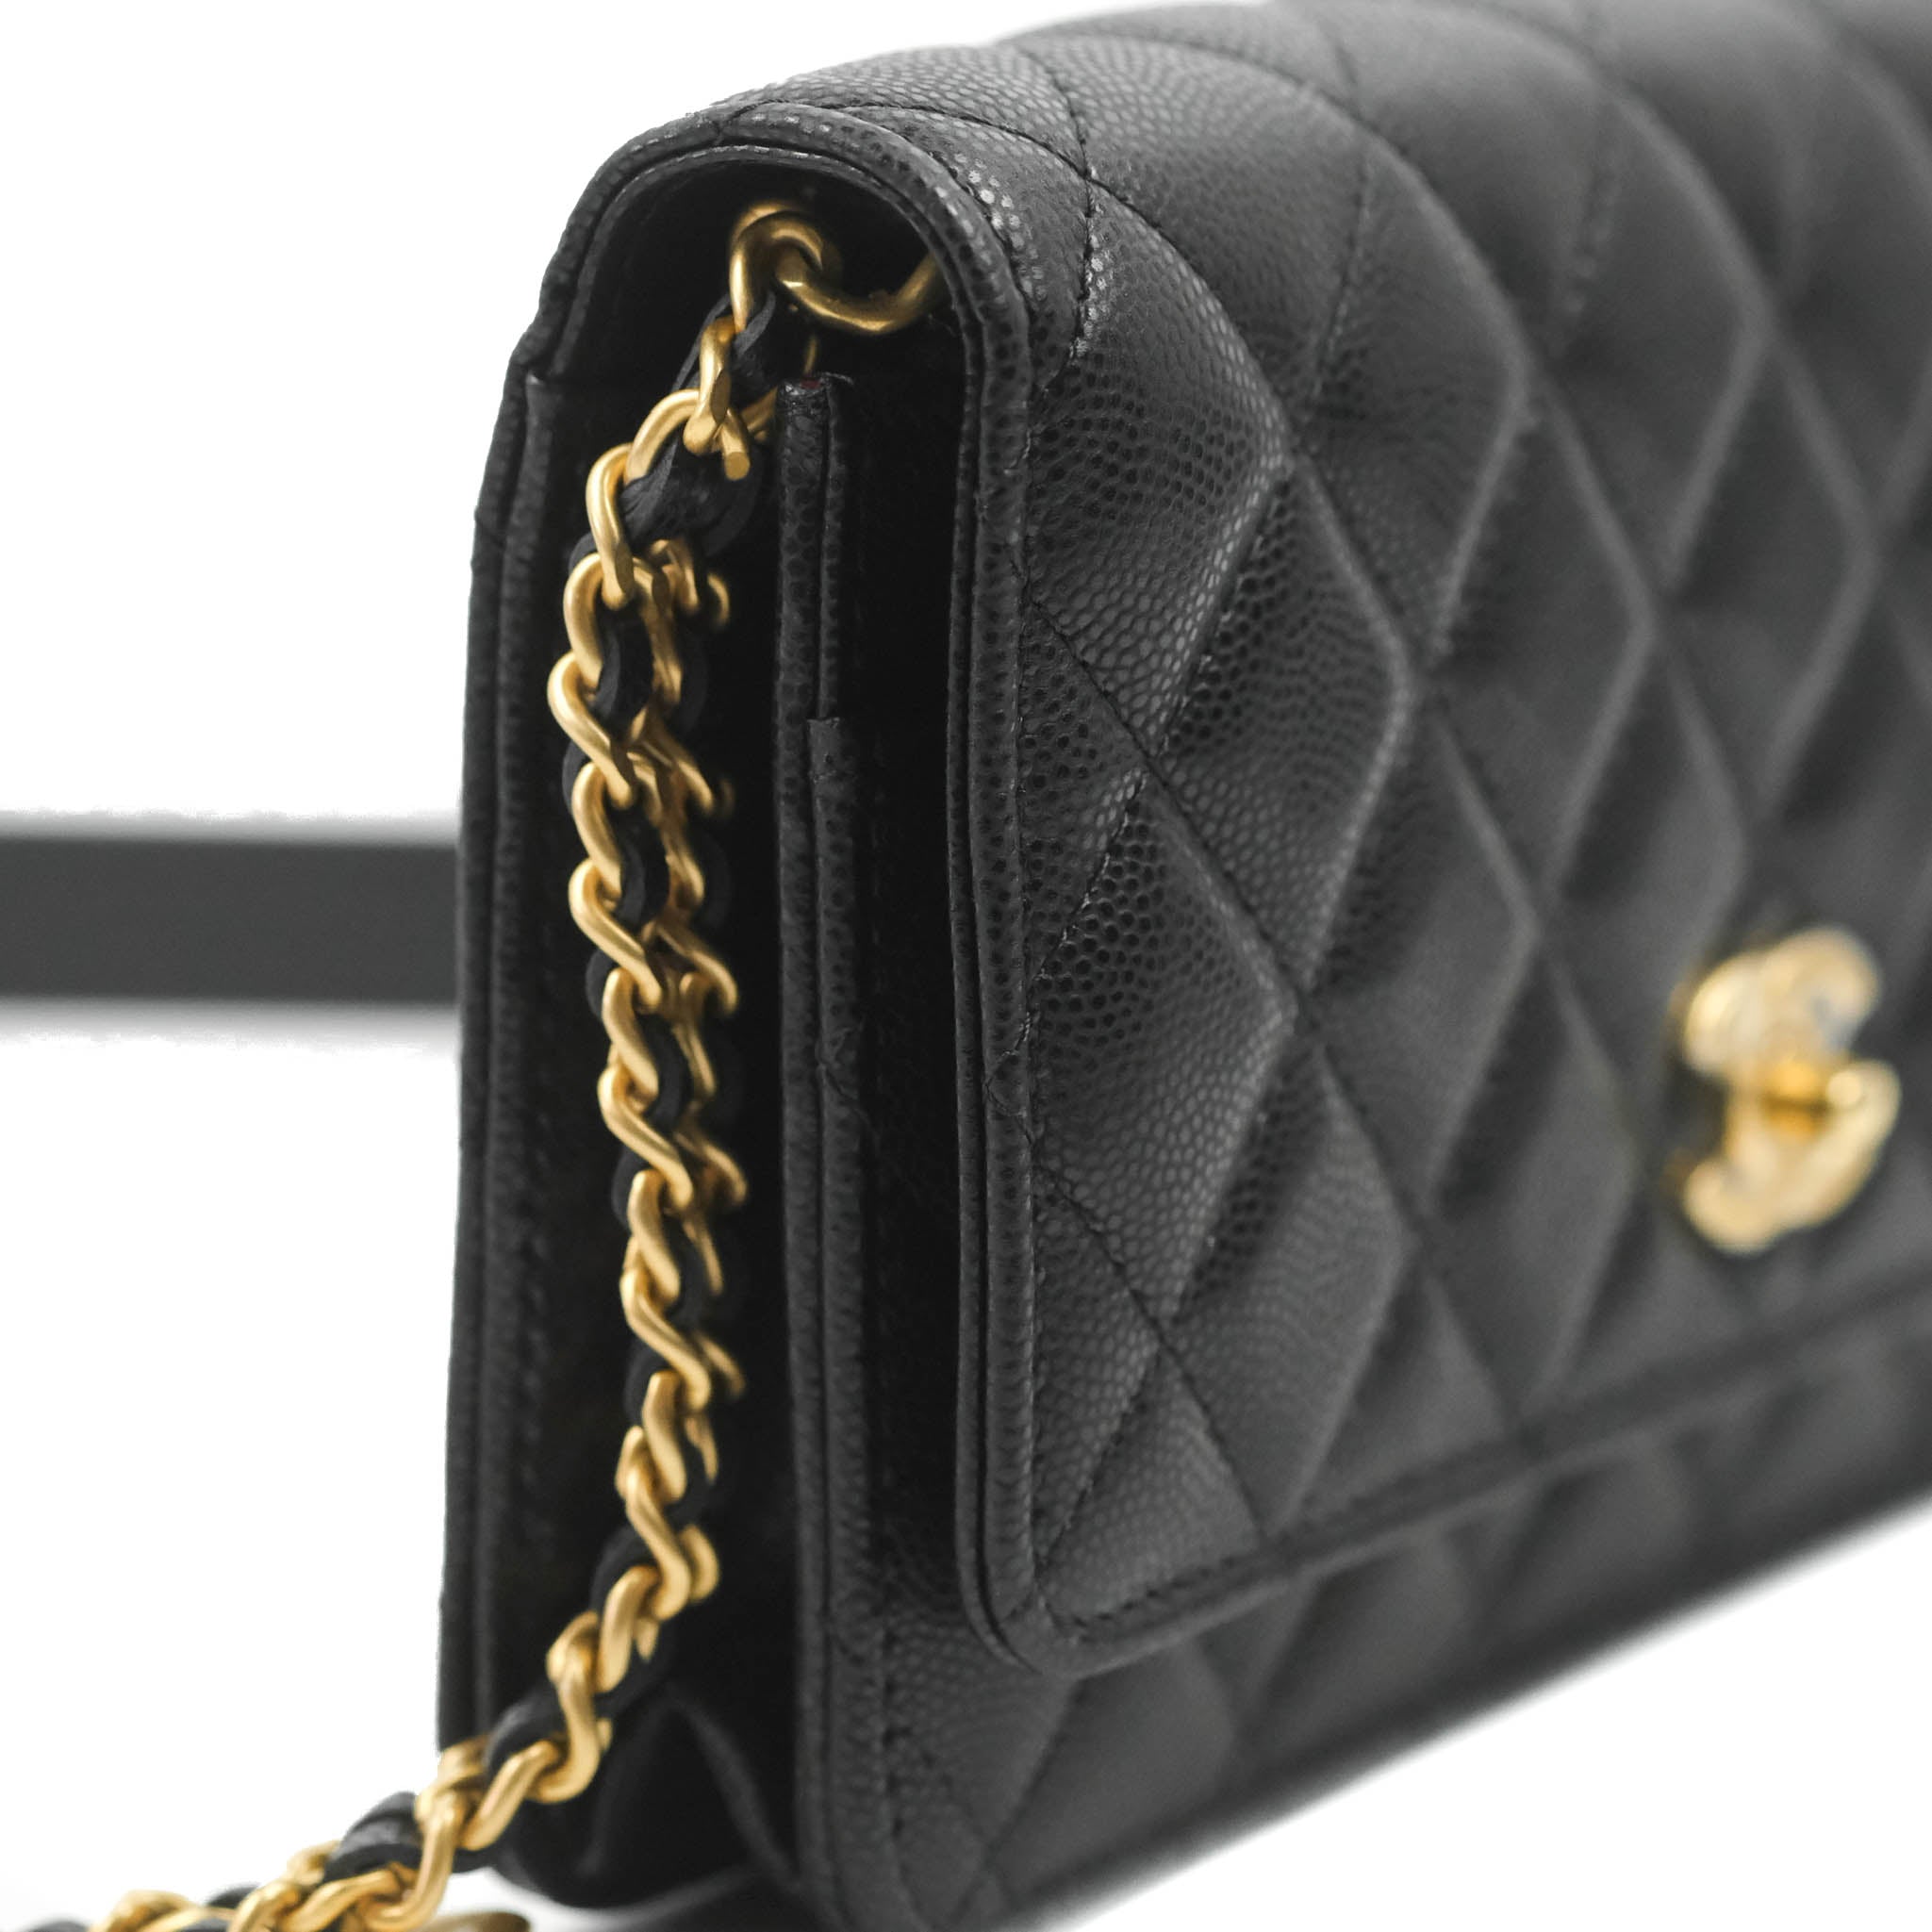 chanel patent leather wallet on a chain